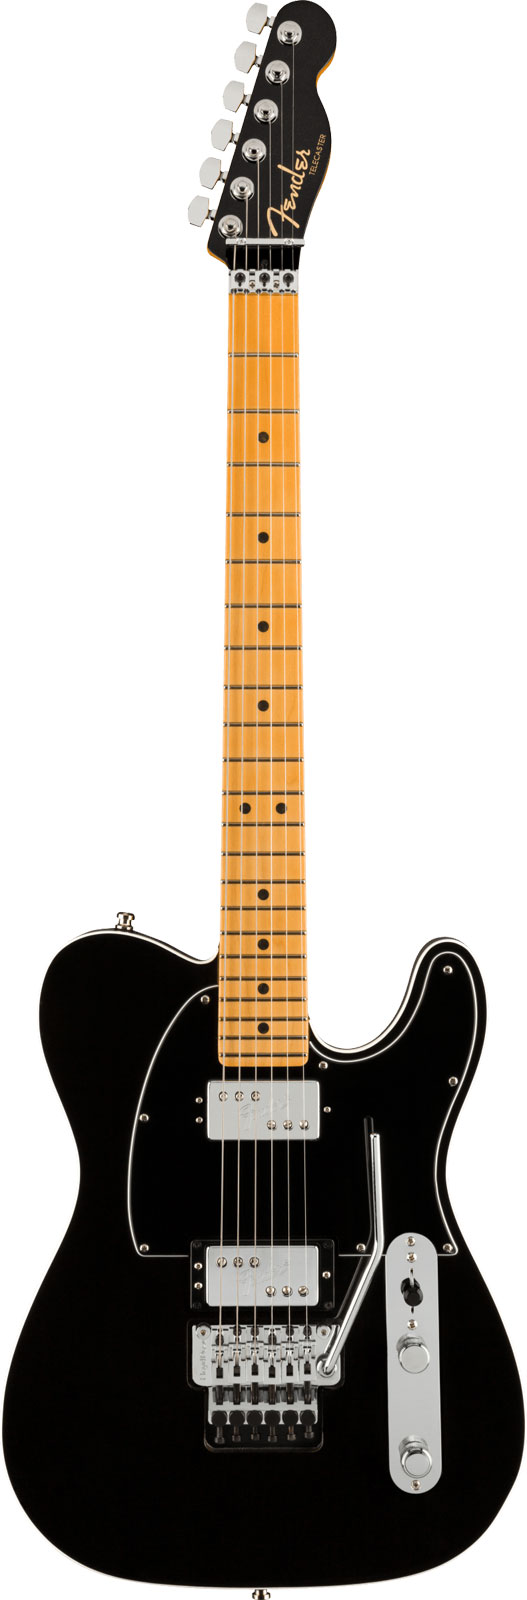 FENDER AMERICAN ULTRA LUXE TELECASTER FLOYD ROSE HH MN, MYSTIC BLACK